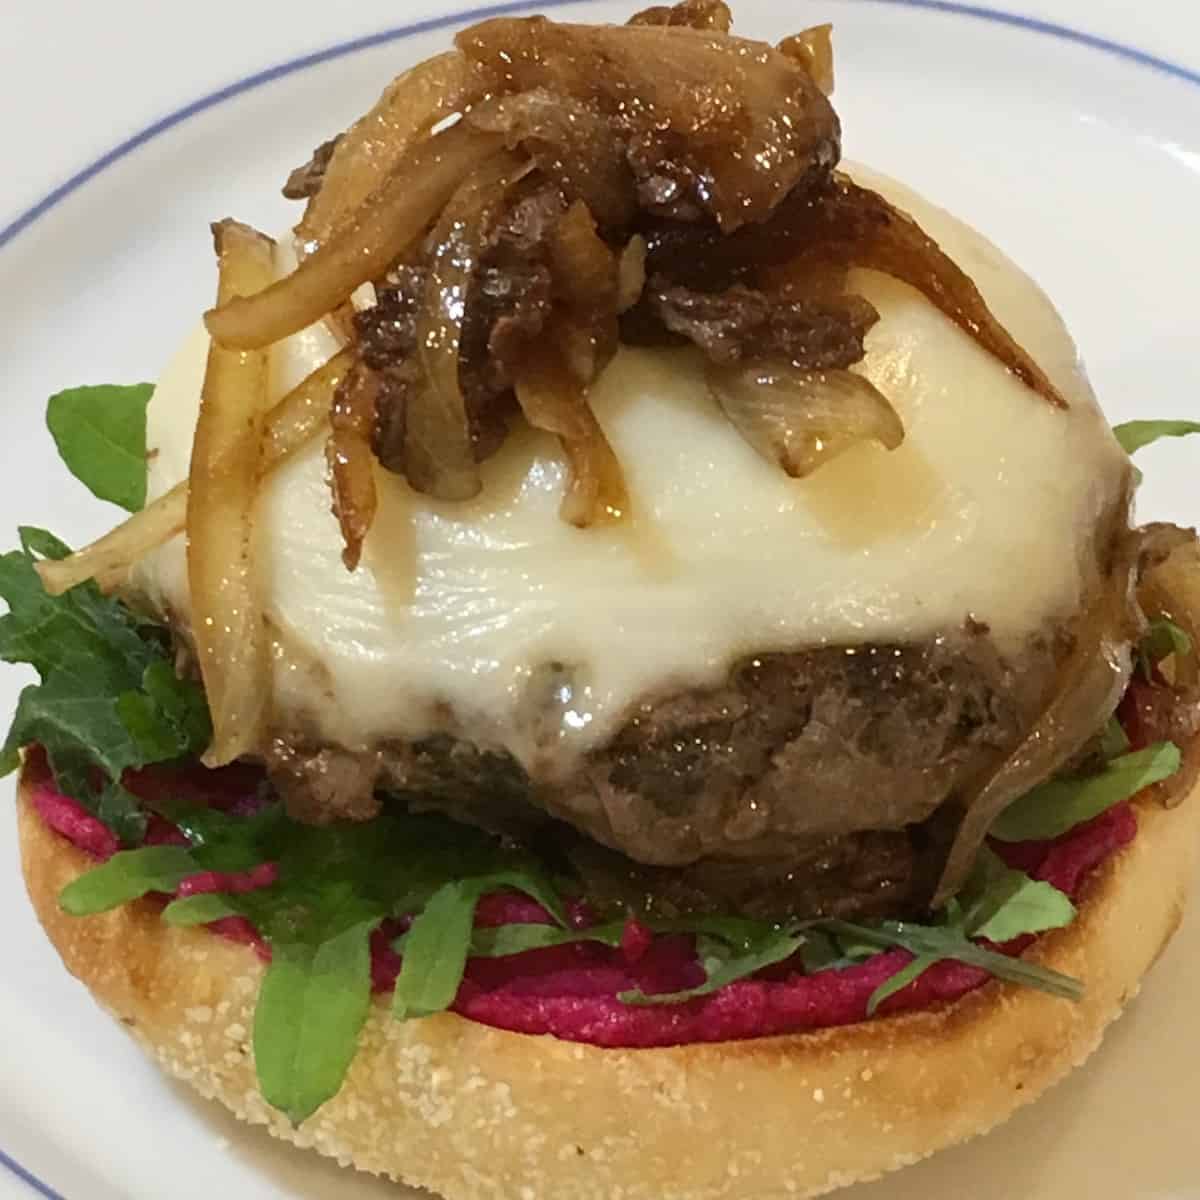 Plated mushroom blend burger topped with cheese and onions.